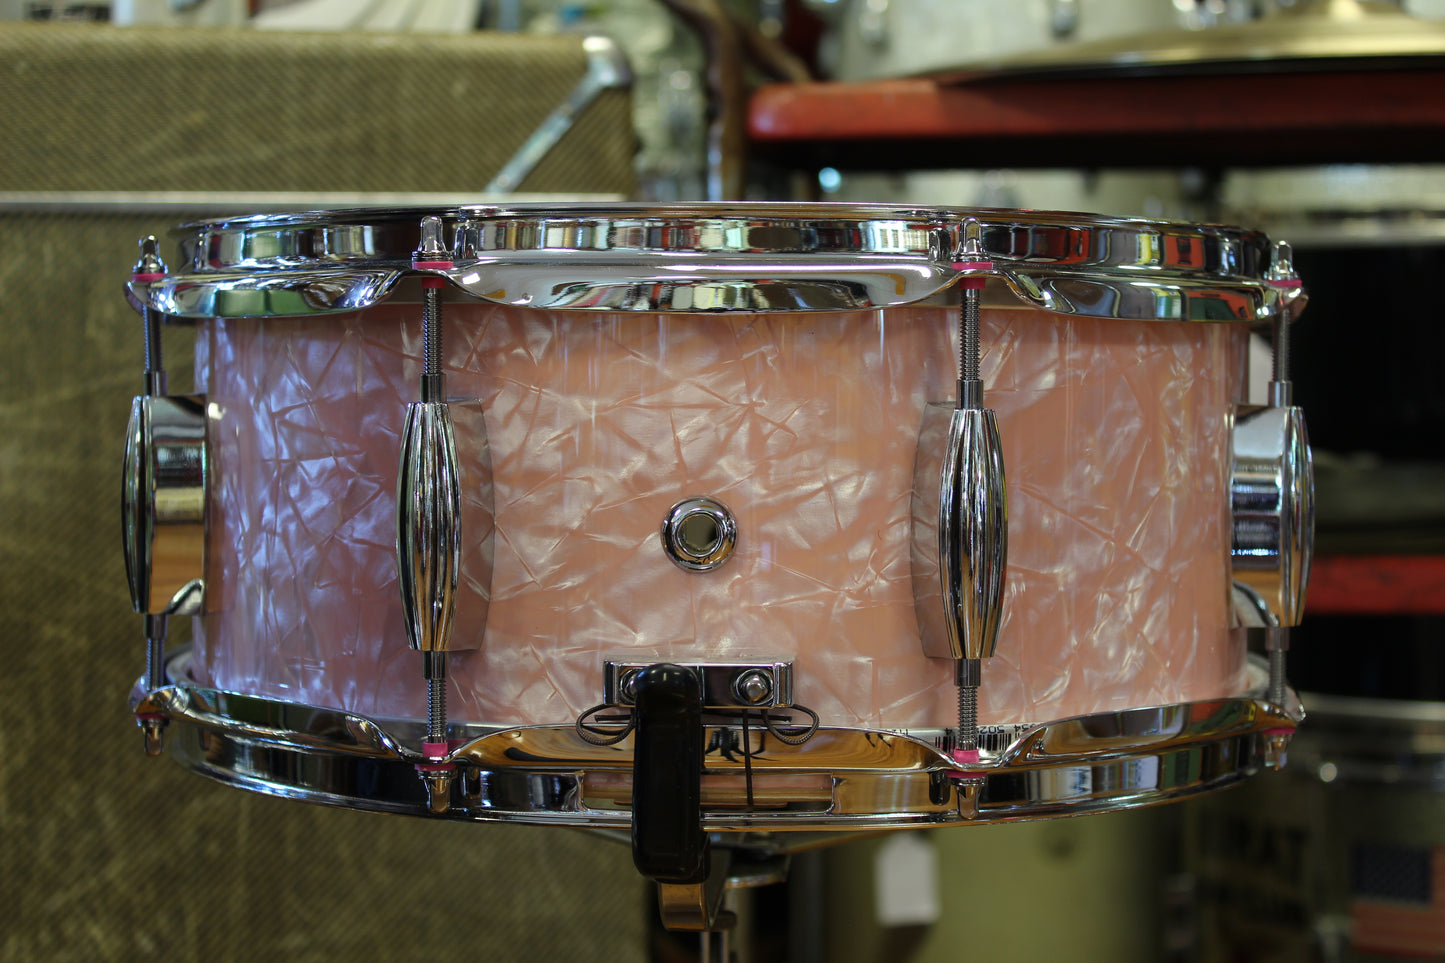 Standard Drum Company Rose Pearl 6x13 Mahogany Snare Drum